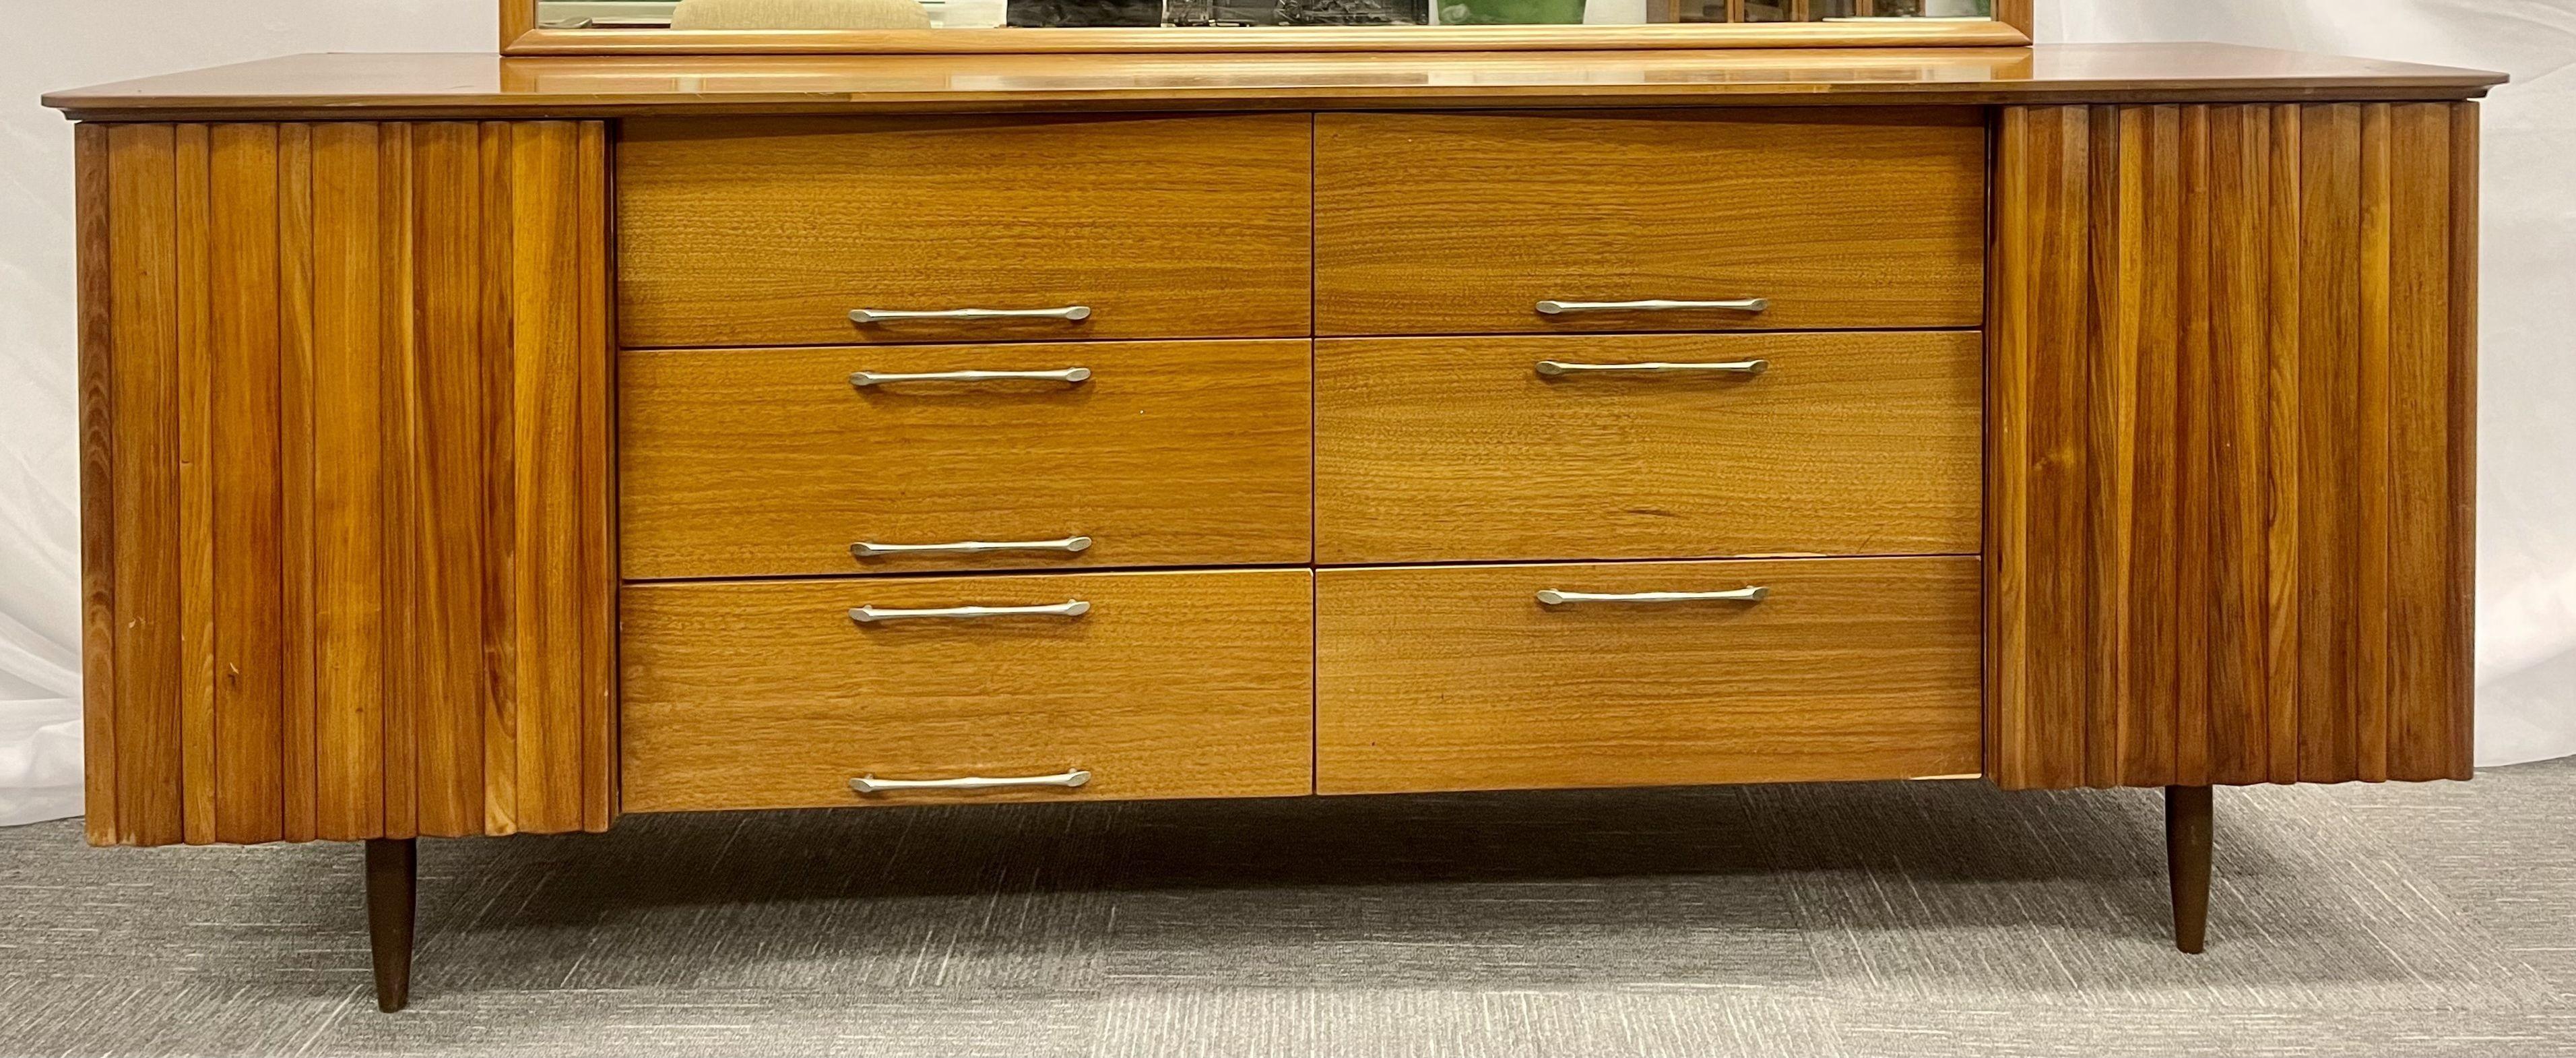 Mid-Century Modern sideboard, dresser, attached mirror, bedroom set, vanity

A fine walnut dresser having six center drawers flanked by doors with fitted drawer interiors on tapering legs.

Mirror size: 31 in. H x 61.25 in. W x 2 in. D
Overall